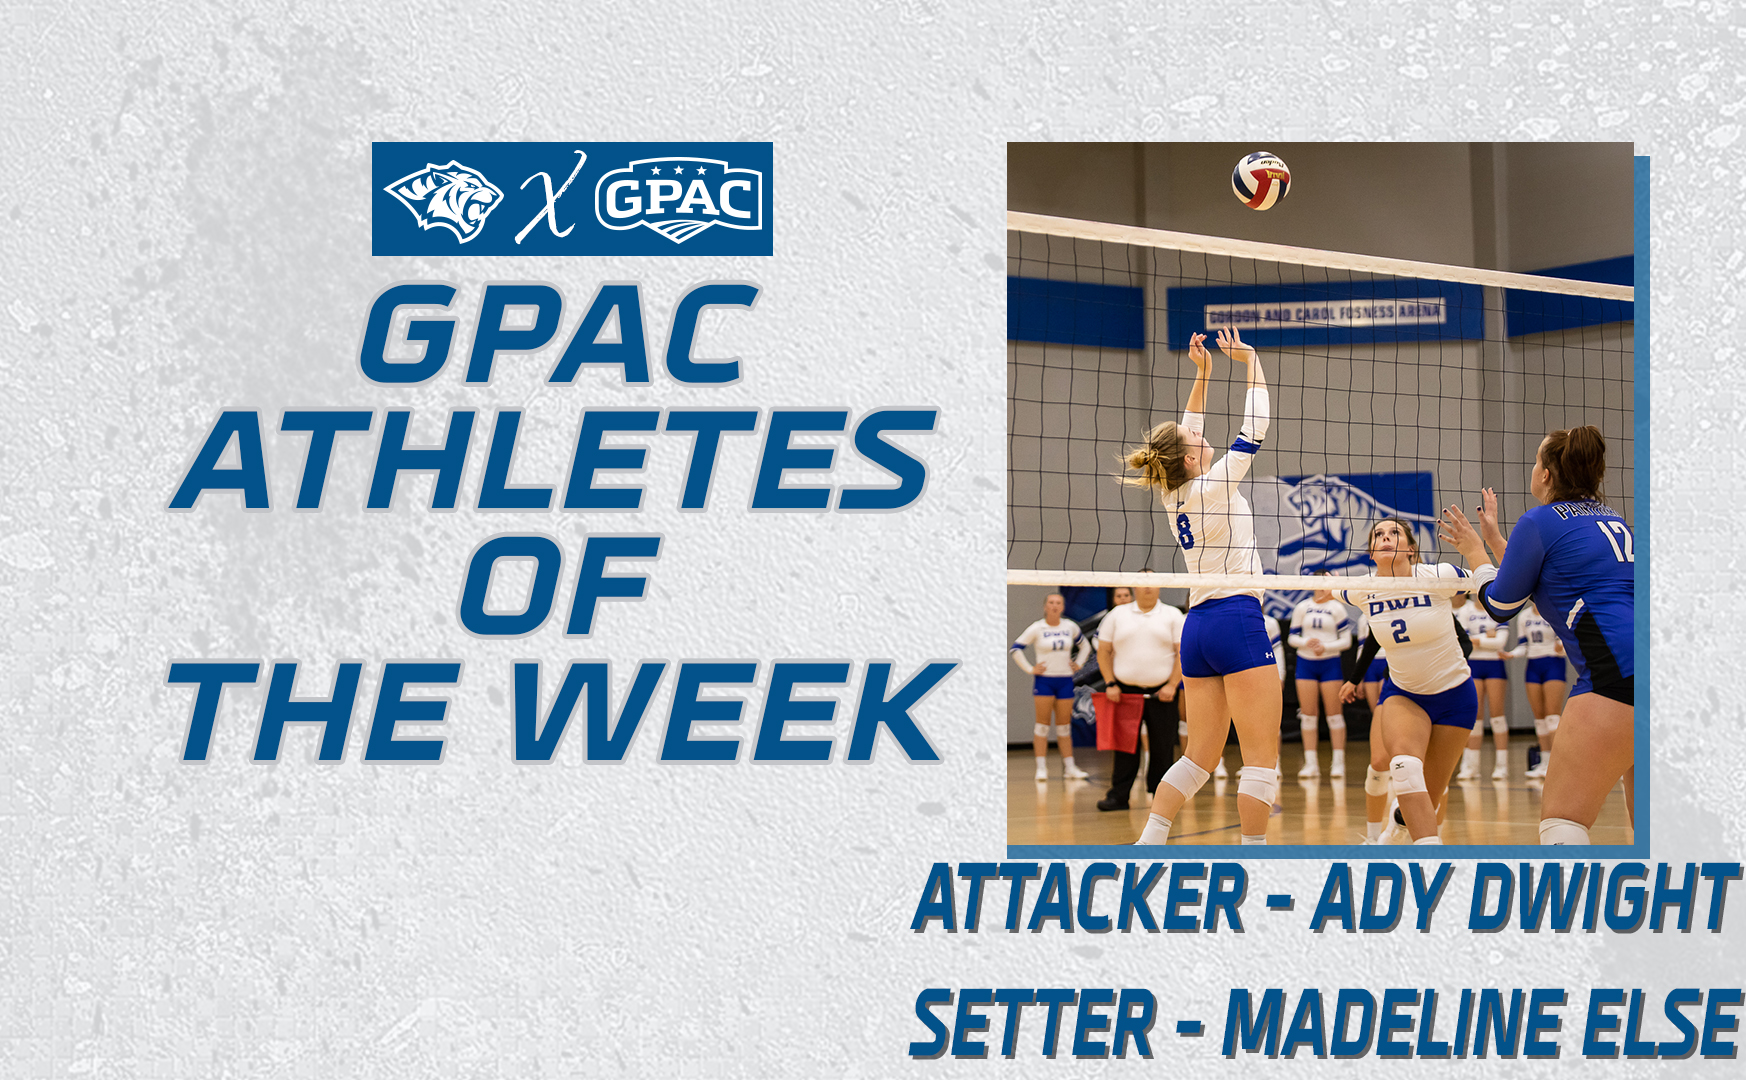 DWIGHT AND ELSE EARN GPAC PLAYER OF THE WEEK HONORS AFTER TWO MAJOR WINS